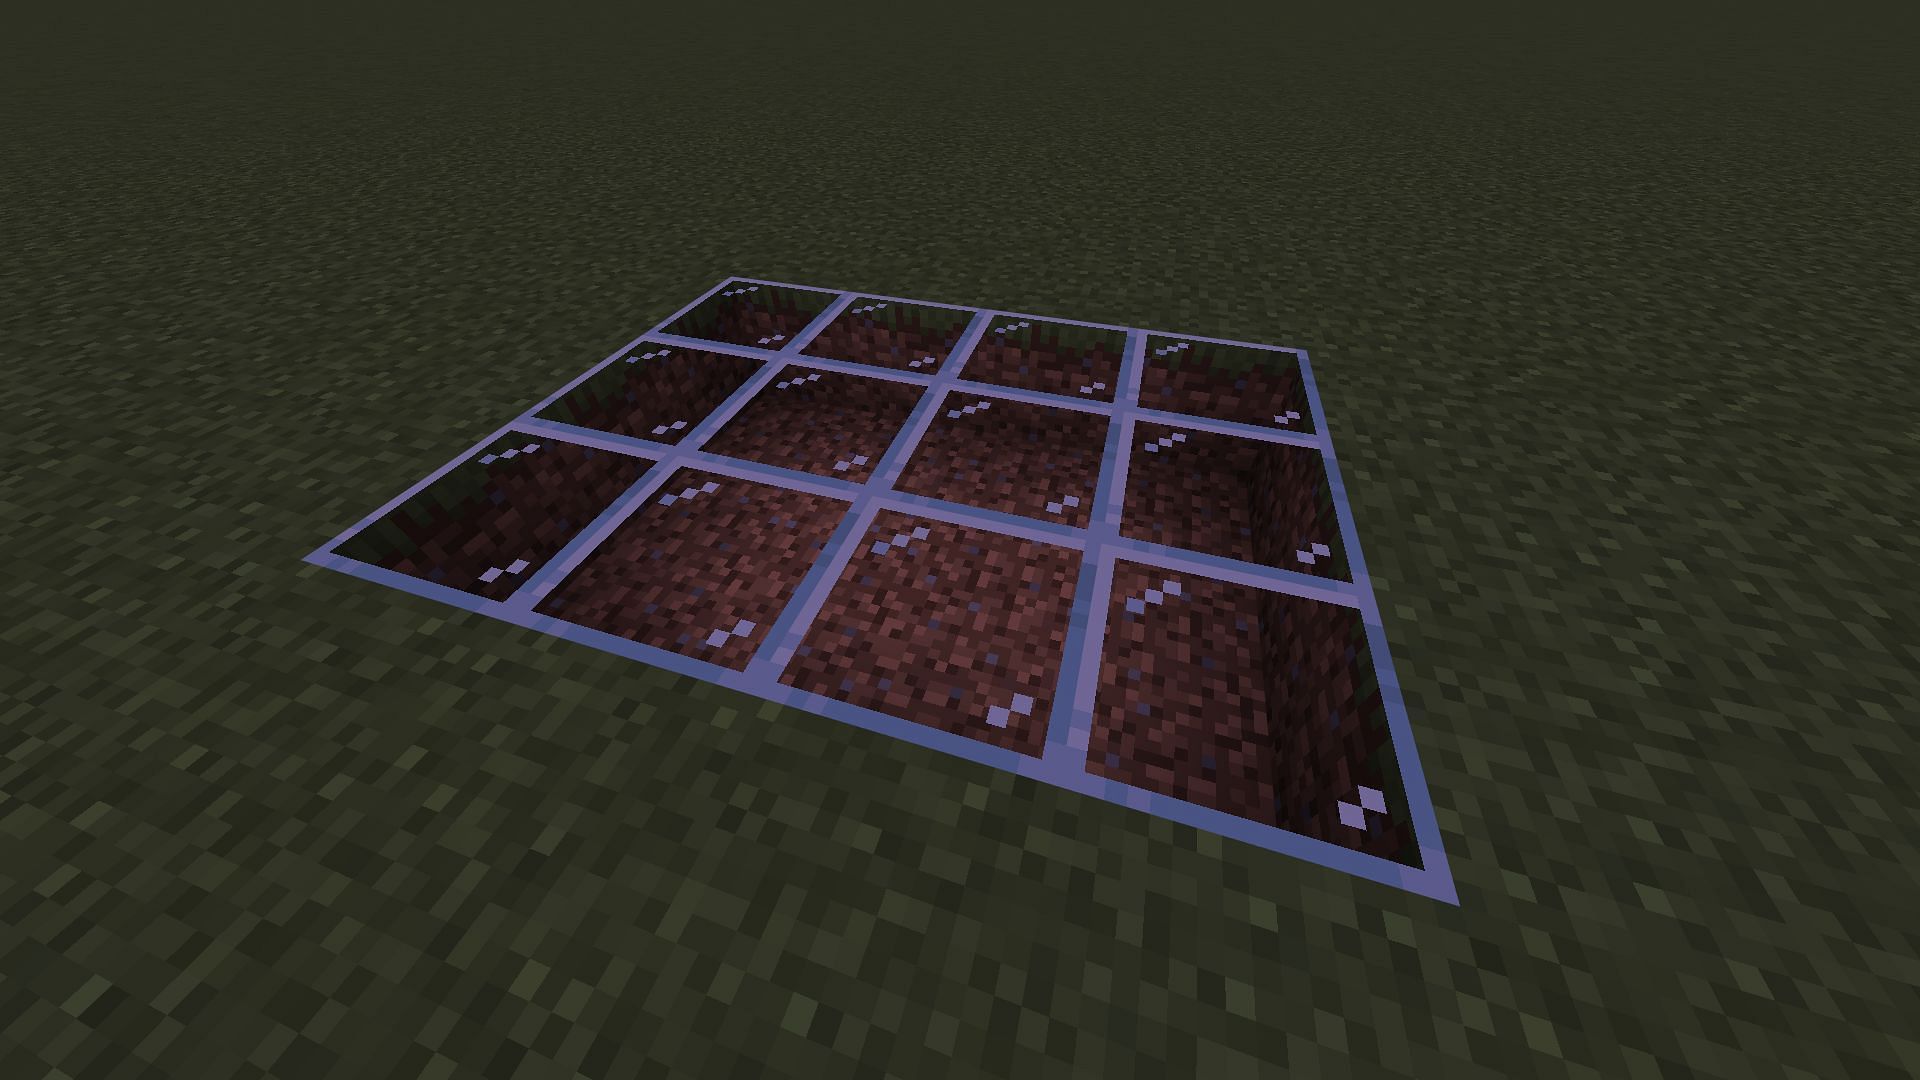 Since glass blocks are completely transparent, no mob can spawn on it in Minecraft (Image via Mojang)